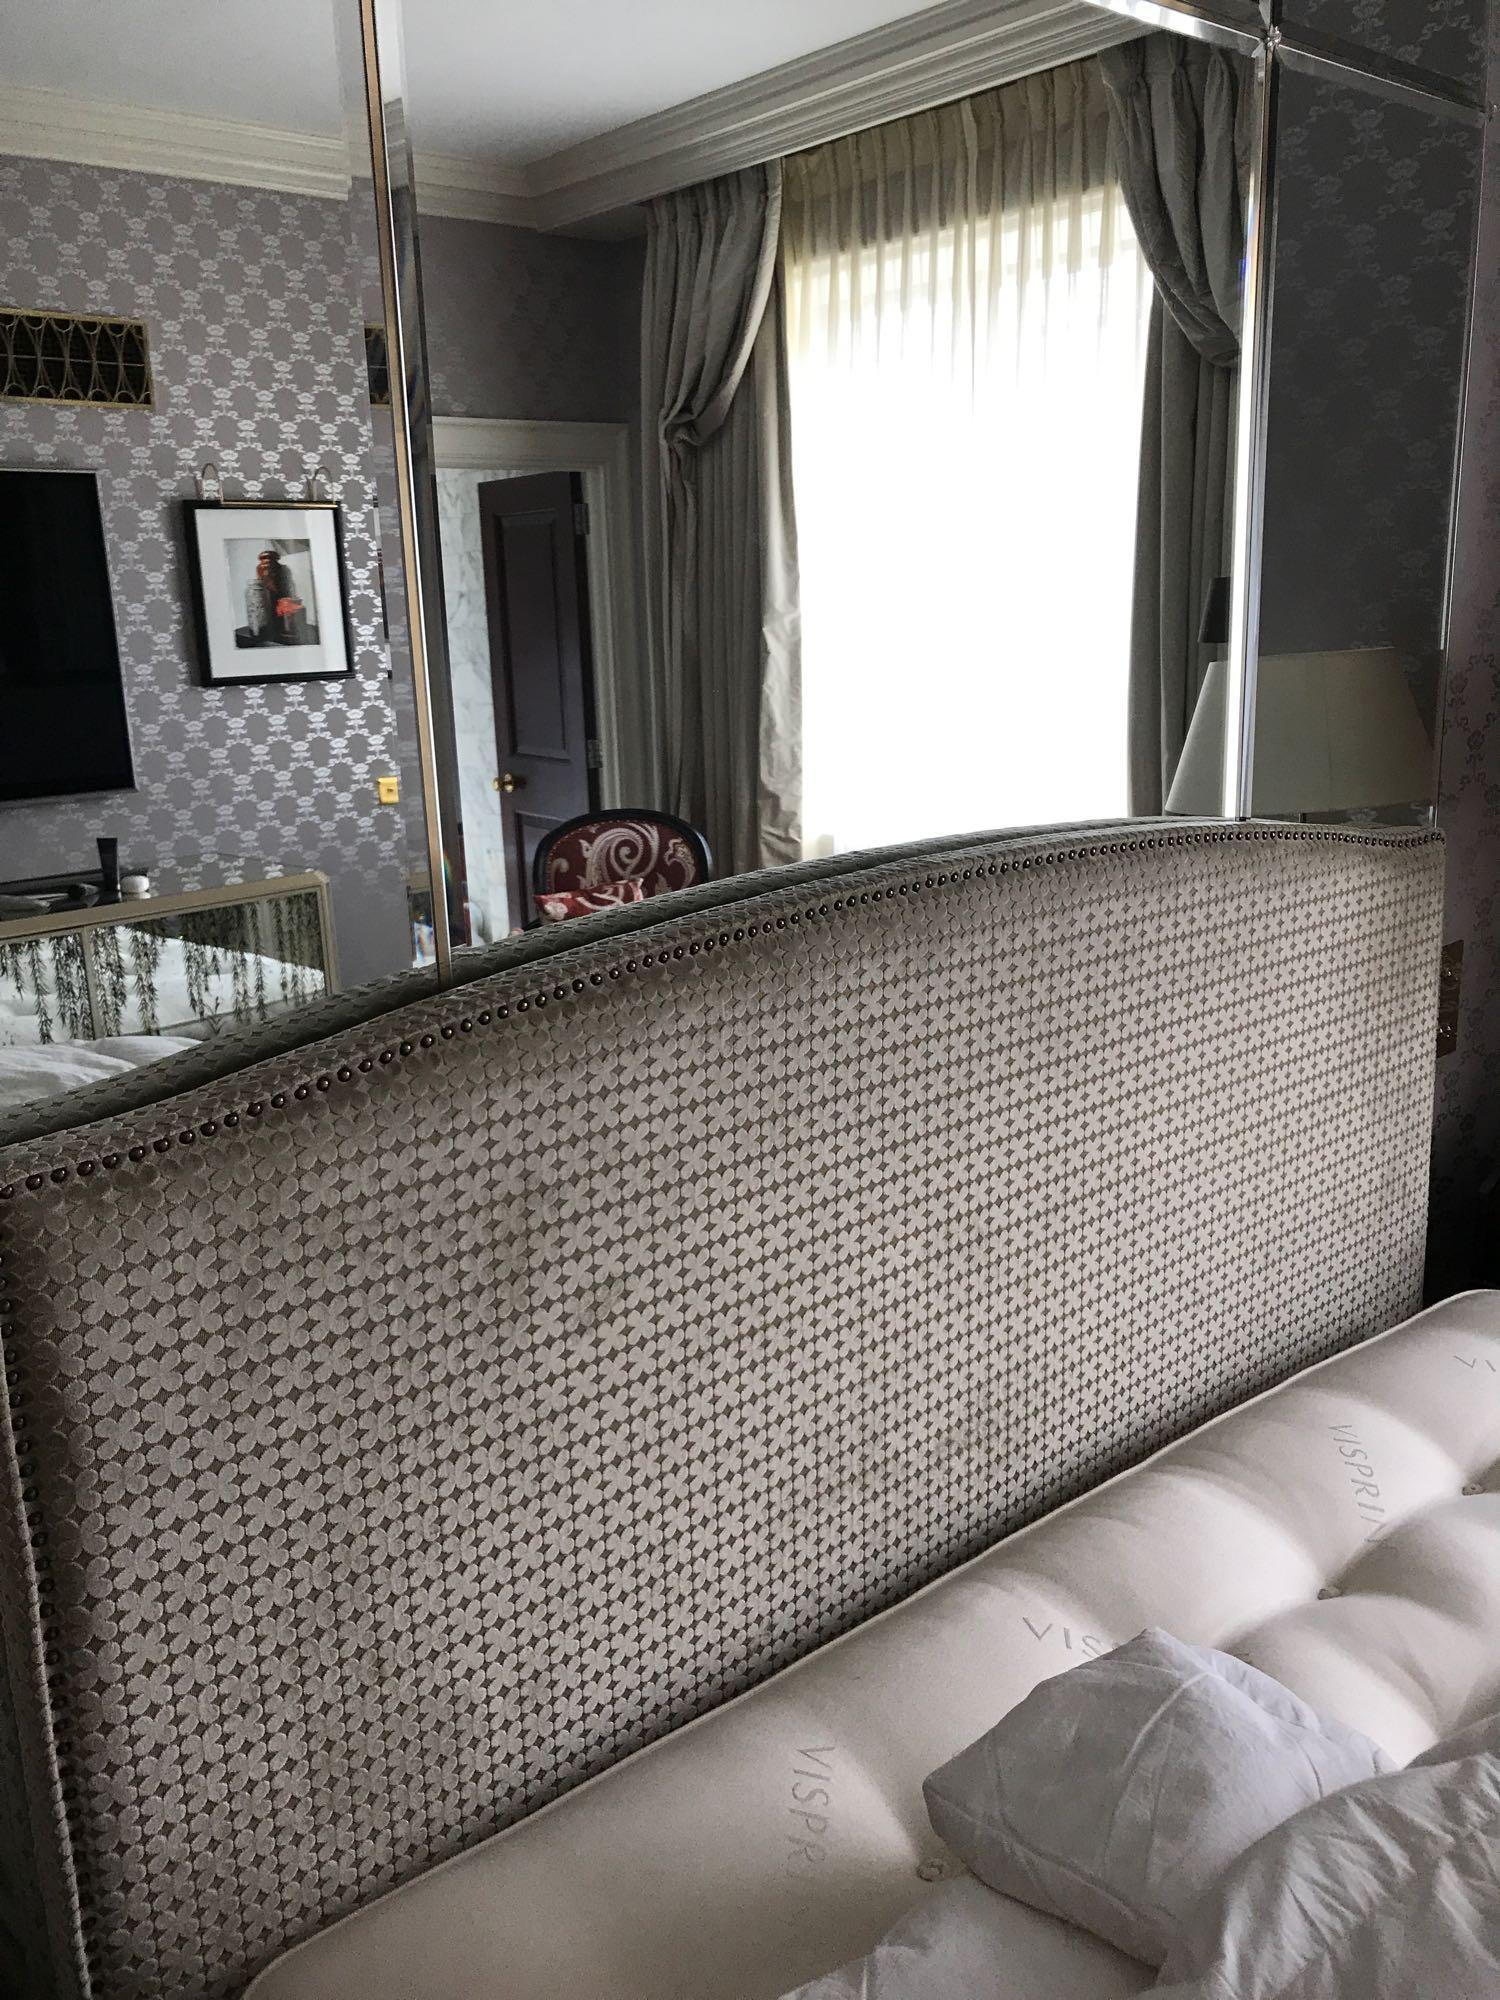 Headboard, Handcrafted With Nail Trim And Padded Textured Woven Upholstery (Room 434) - Image 2 of 2